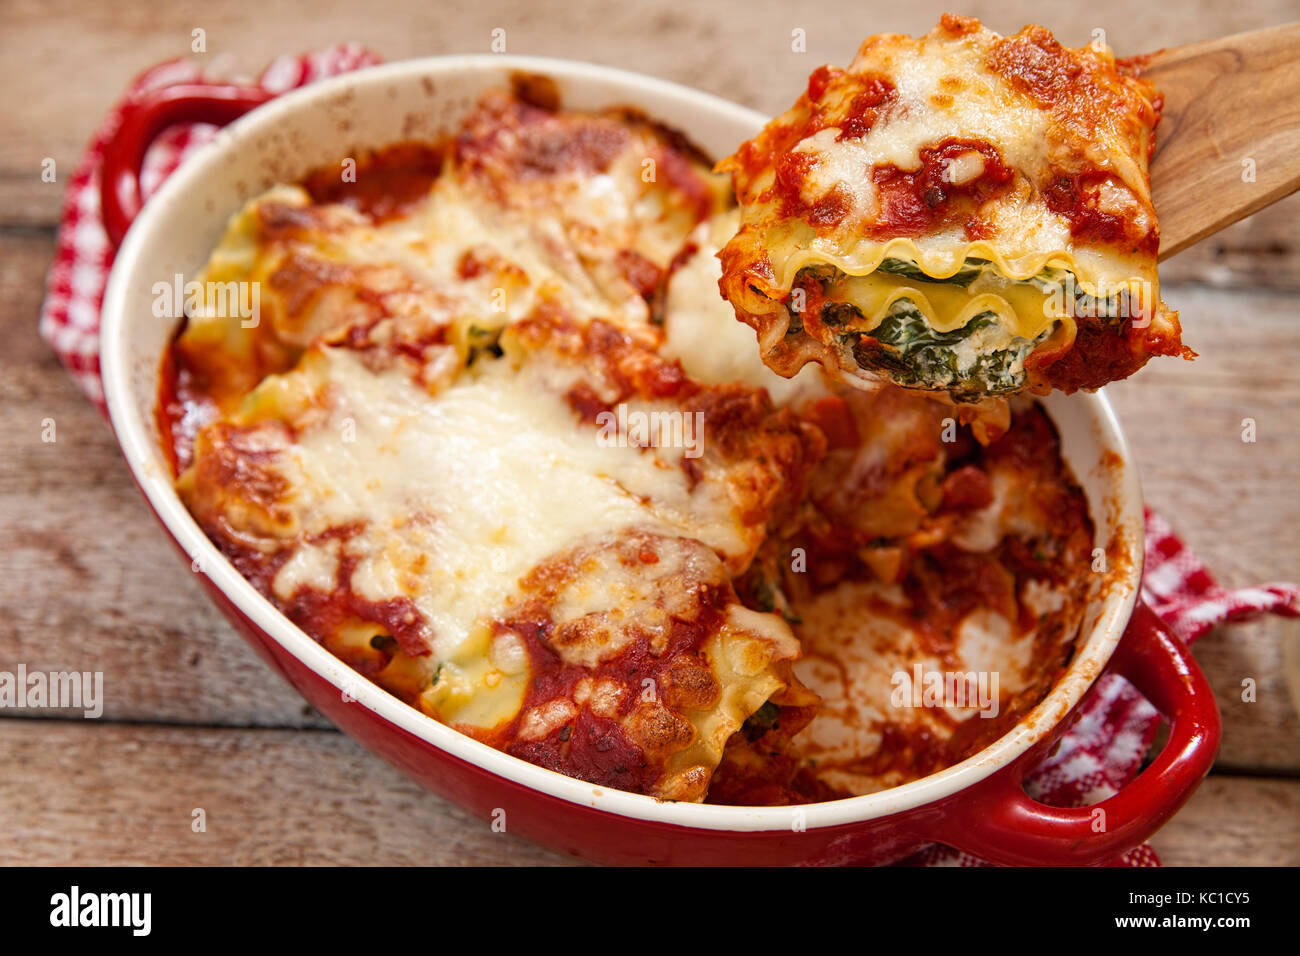 italian lasagna rolls with tomatoes spinach and ricotta cheese Stock Photo